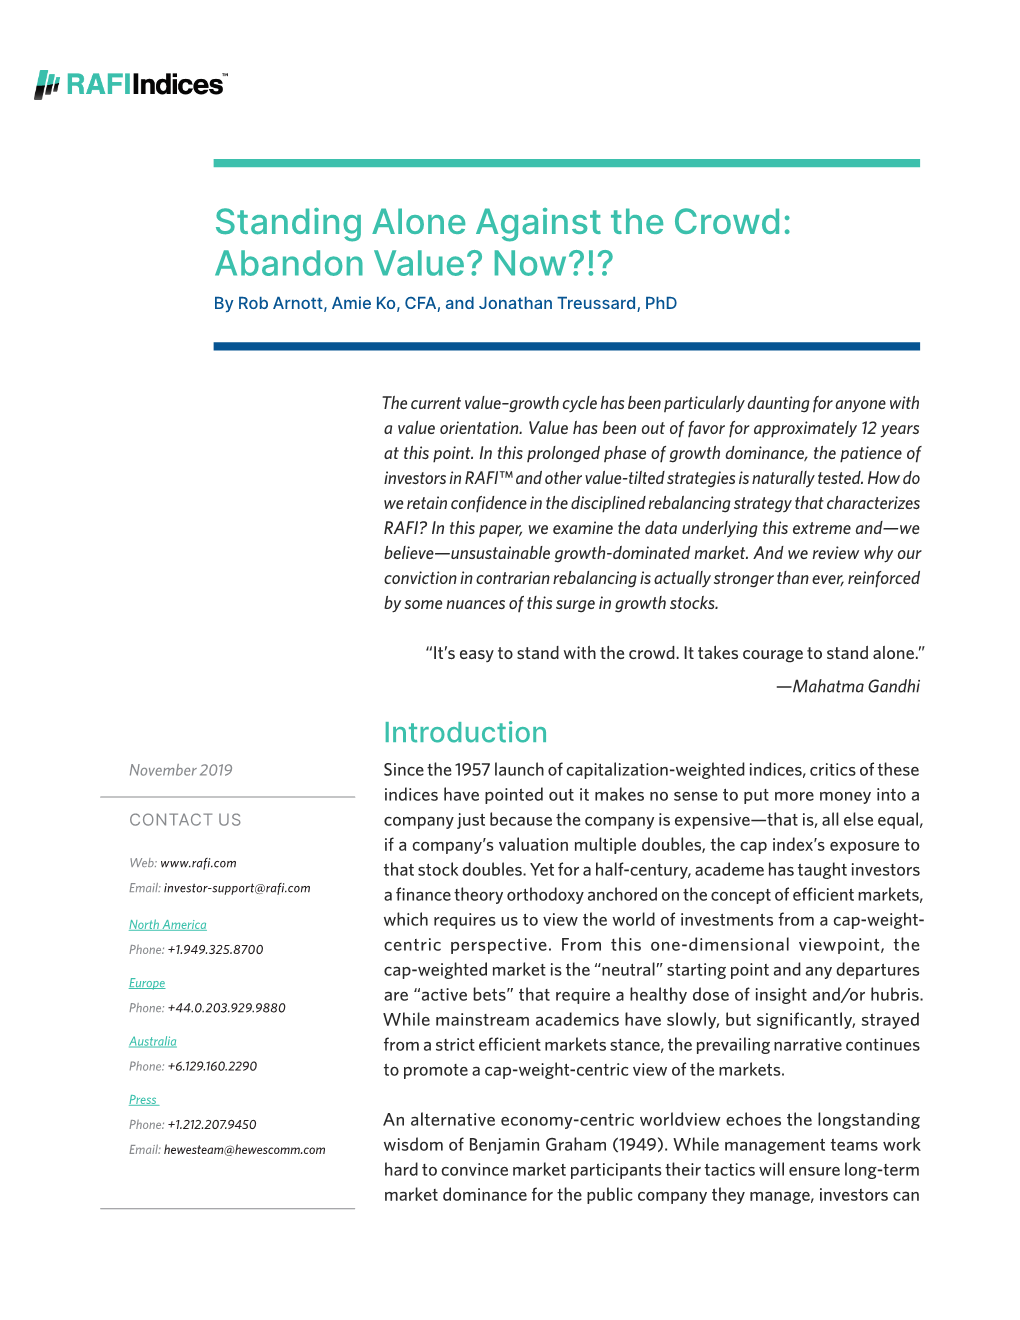 Standing Alone Against the Crowd: Abandon Value? Now?!? by Rob Arnott, Amie Ko, CFA, and Jonathan Treussard, Phd